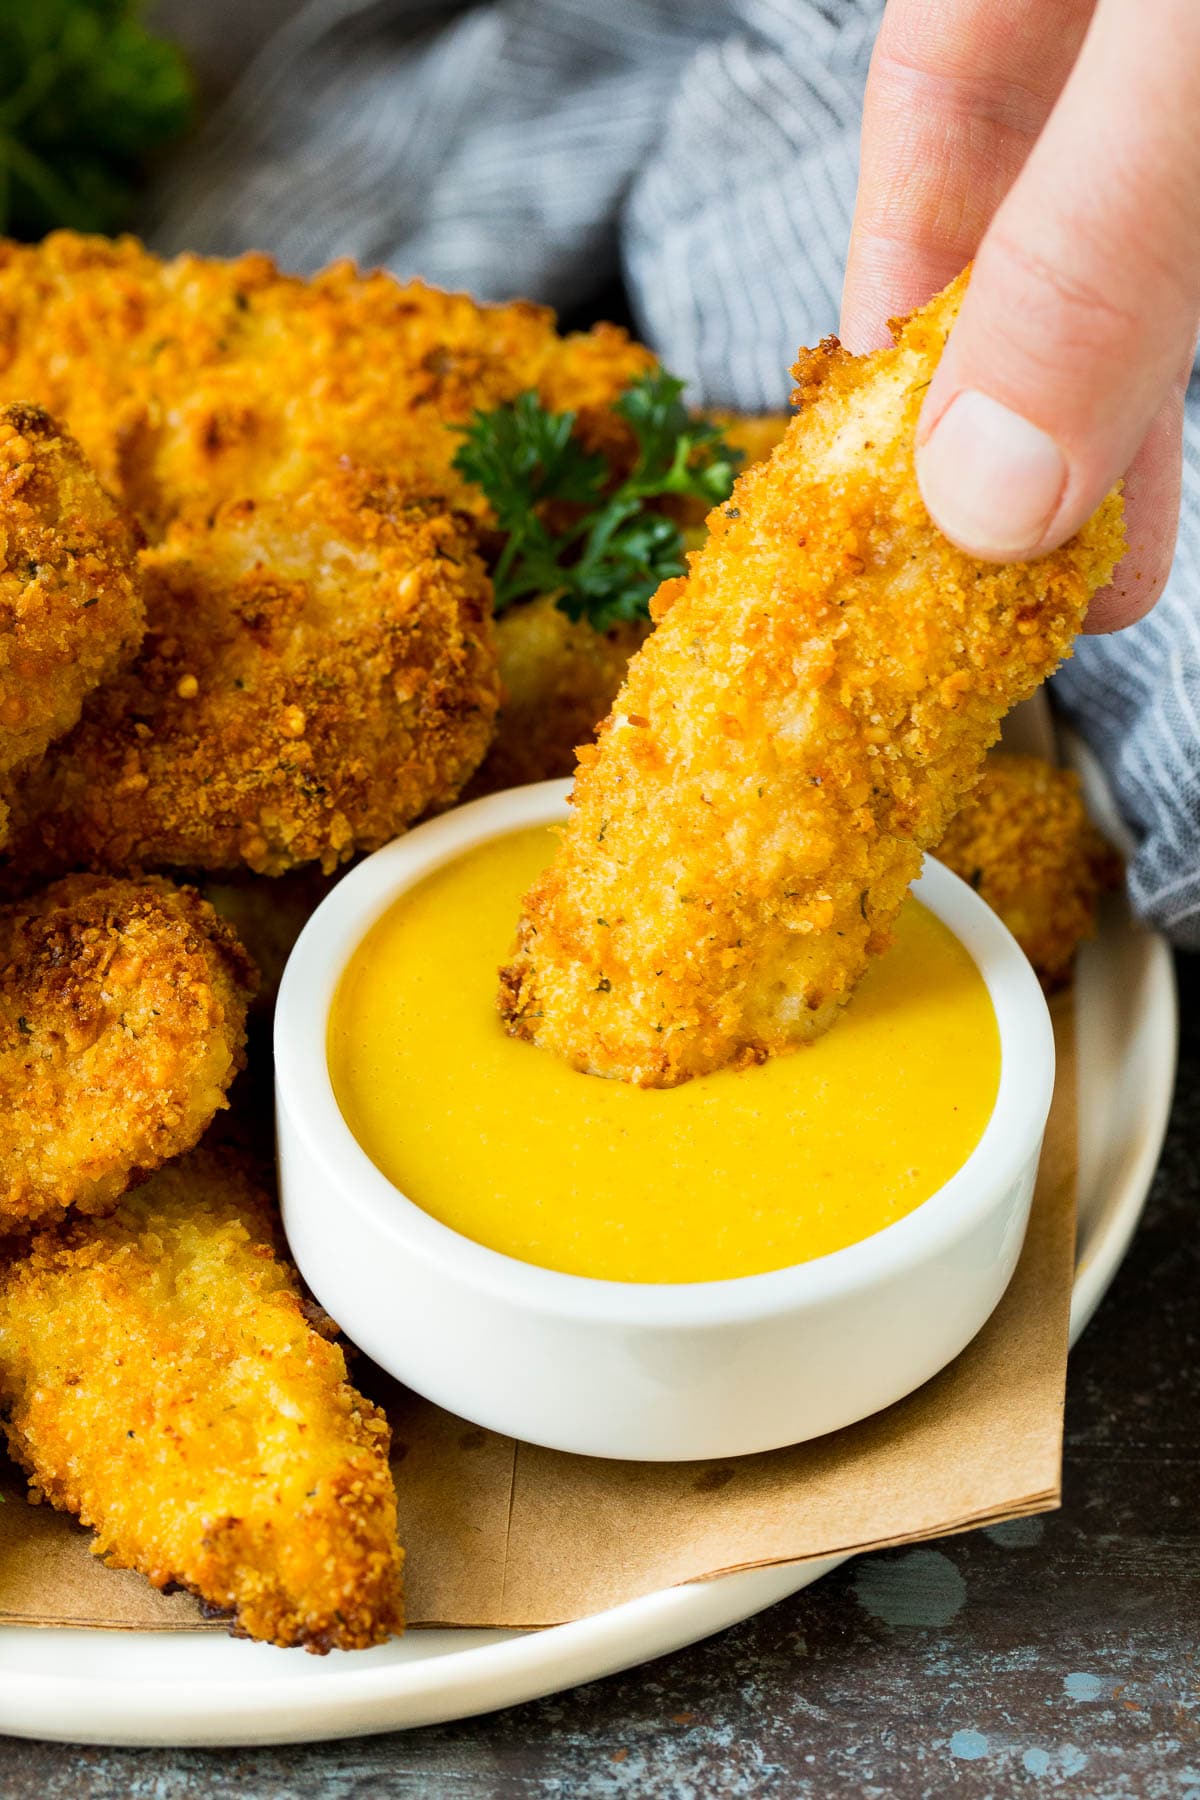 A chicken finger being dipped into honey mustard sauce.